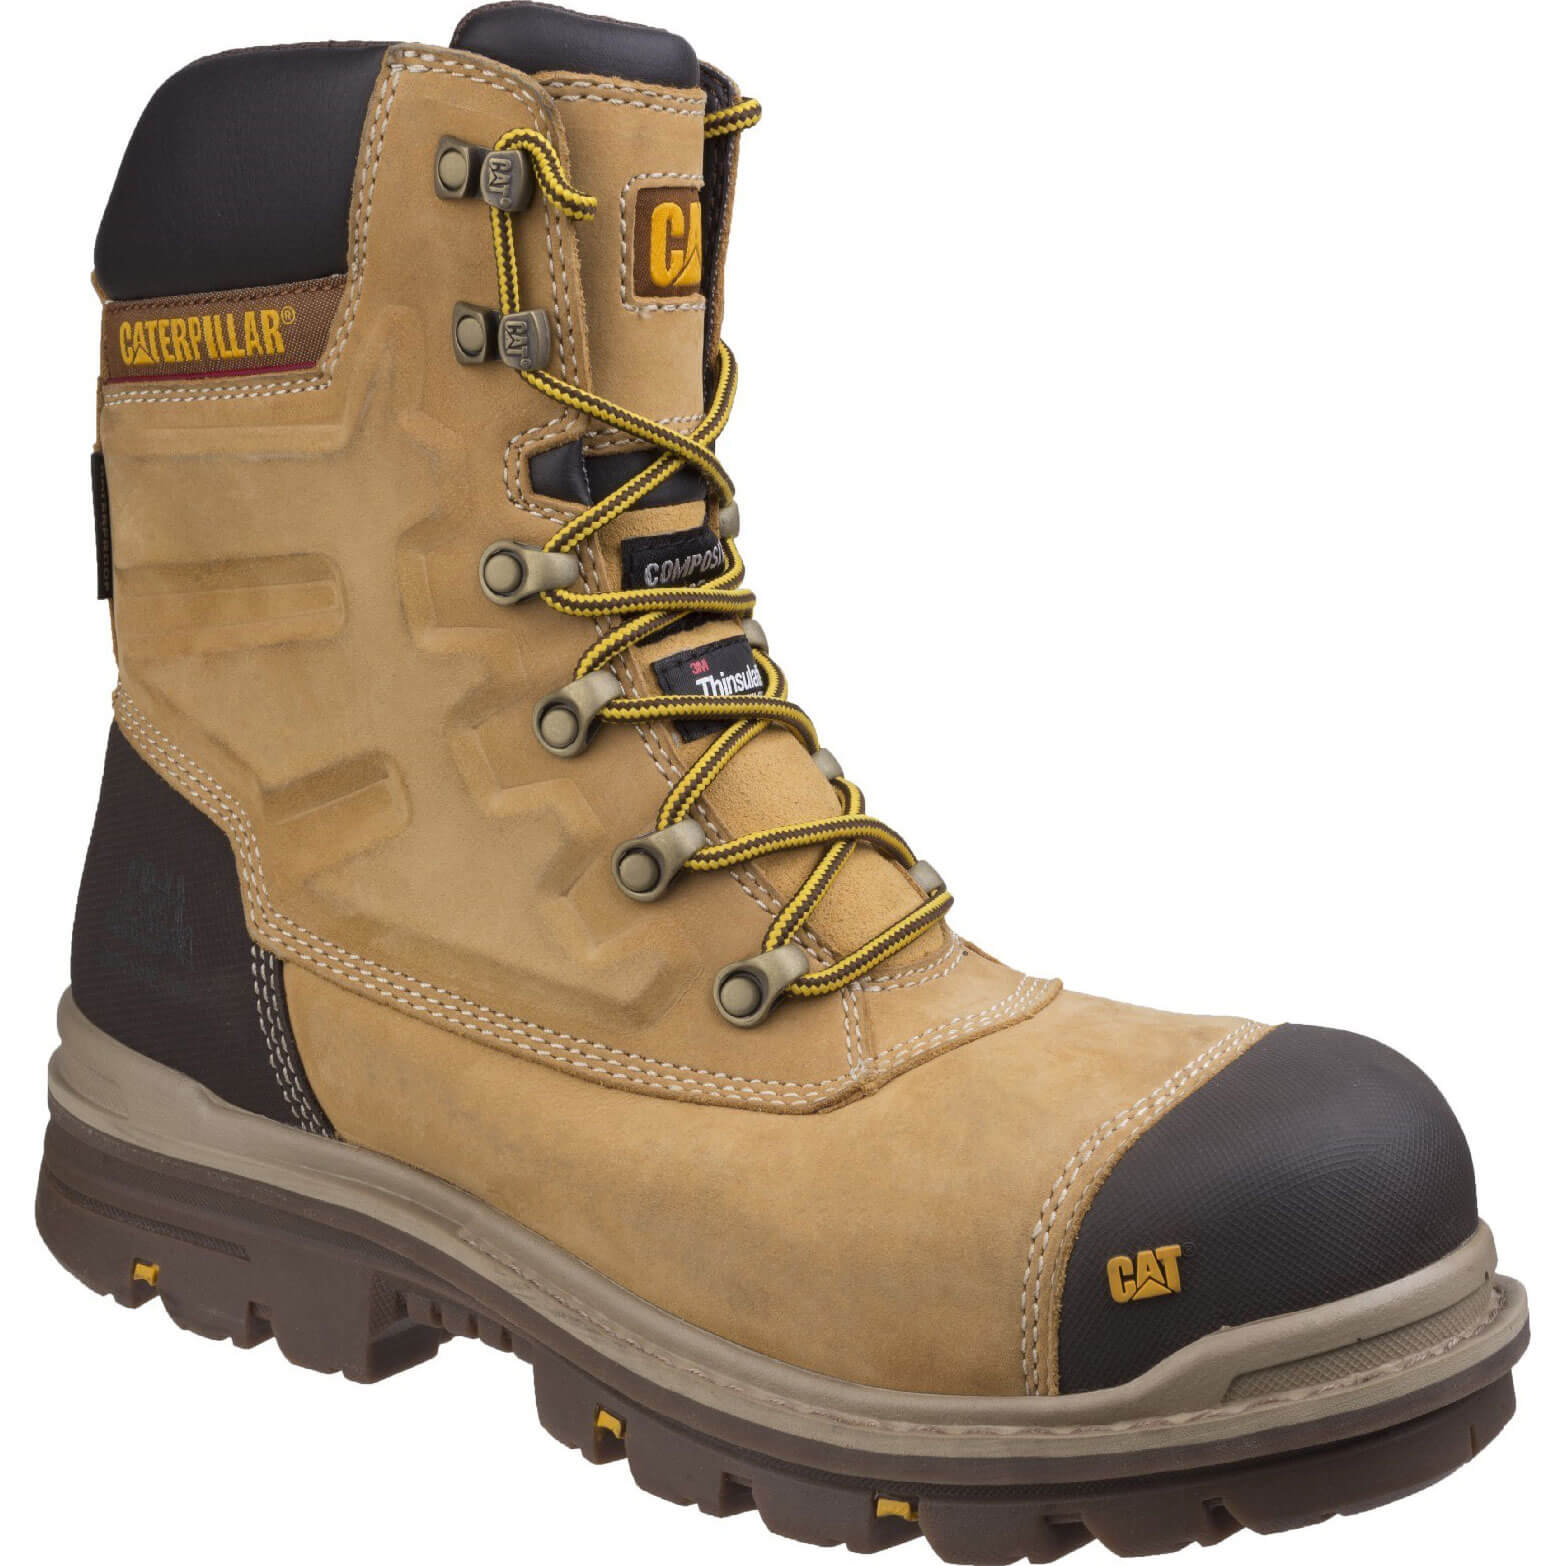 Image of Caterpillar Mens Premier Waterproof Safety Boots Honey Size 12